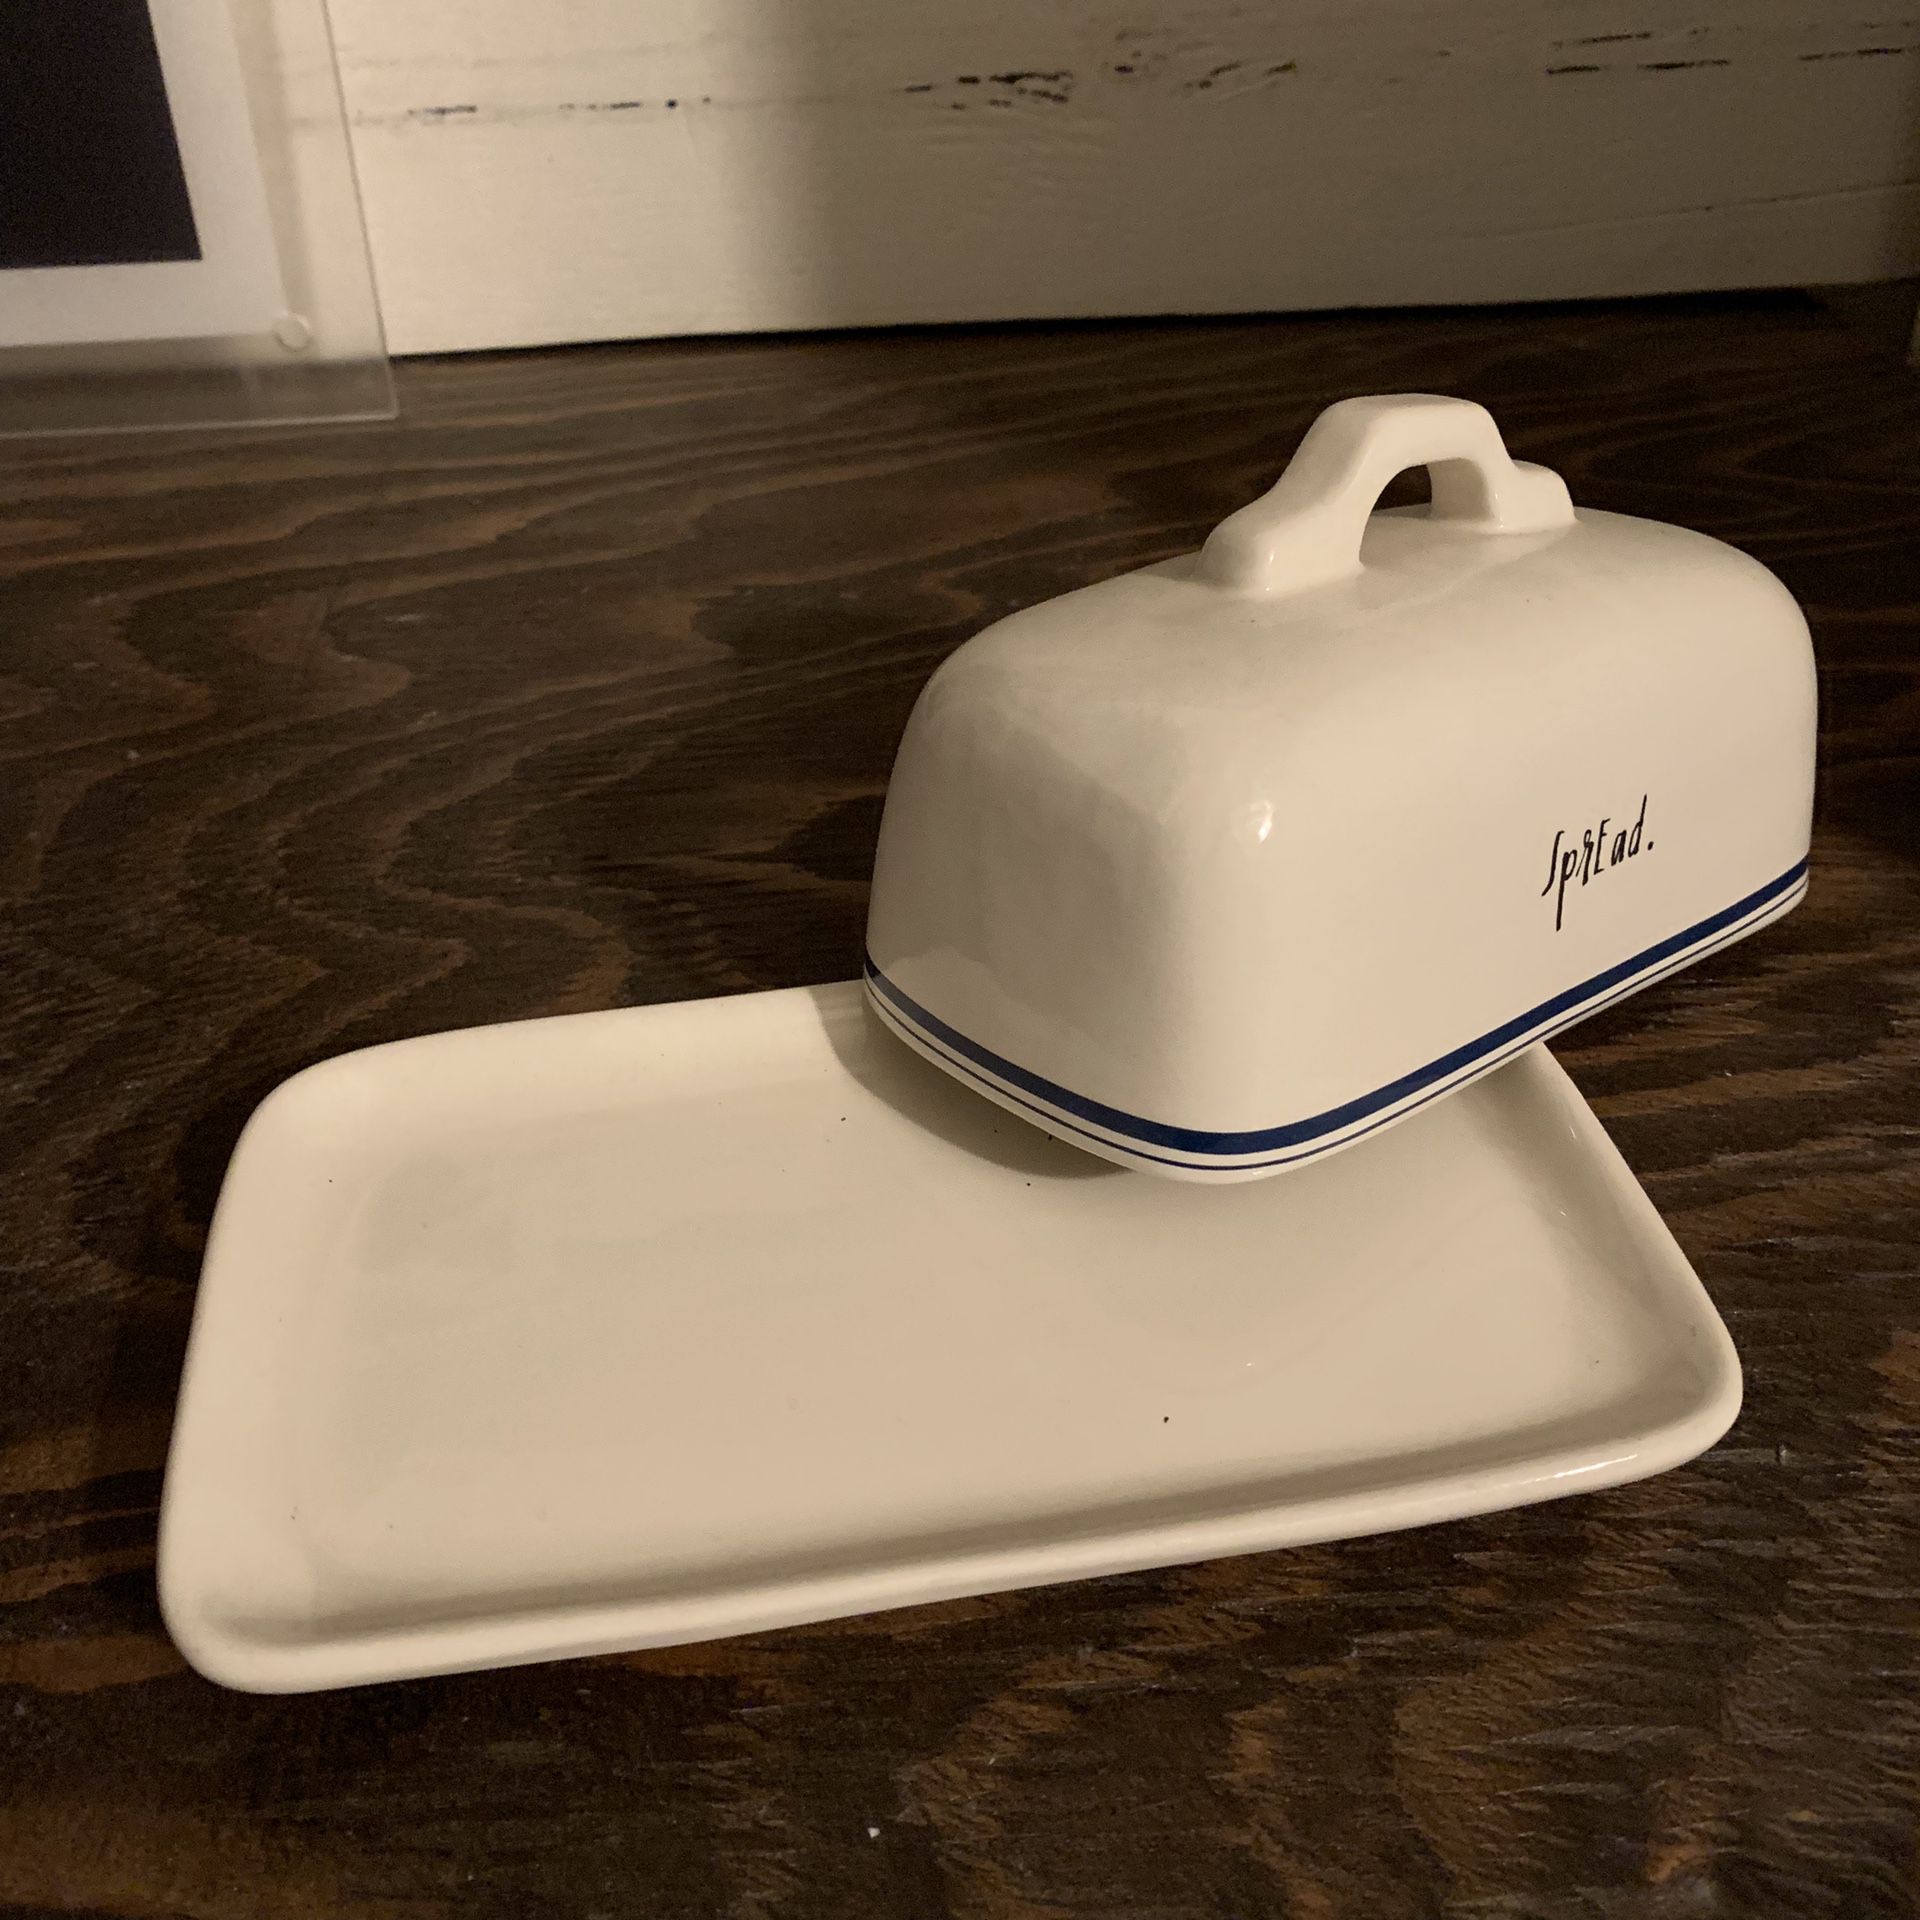 Brand New Rae Dunn Spread Butter Dish with Cover